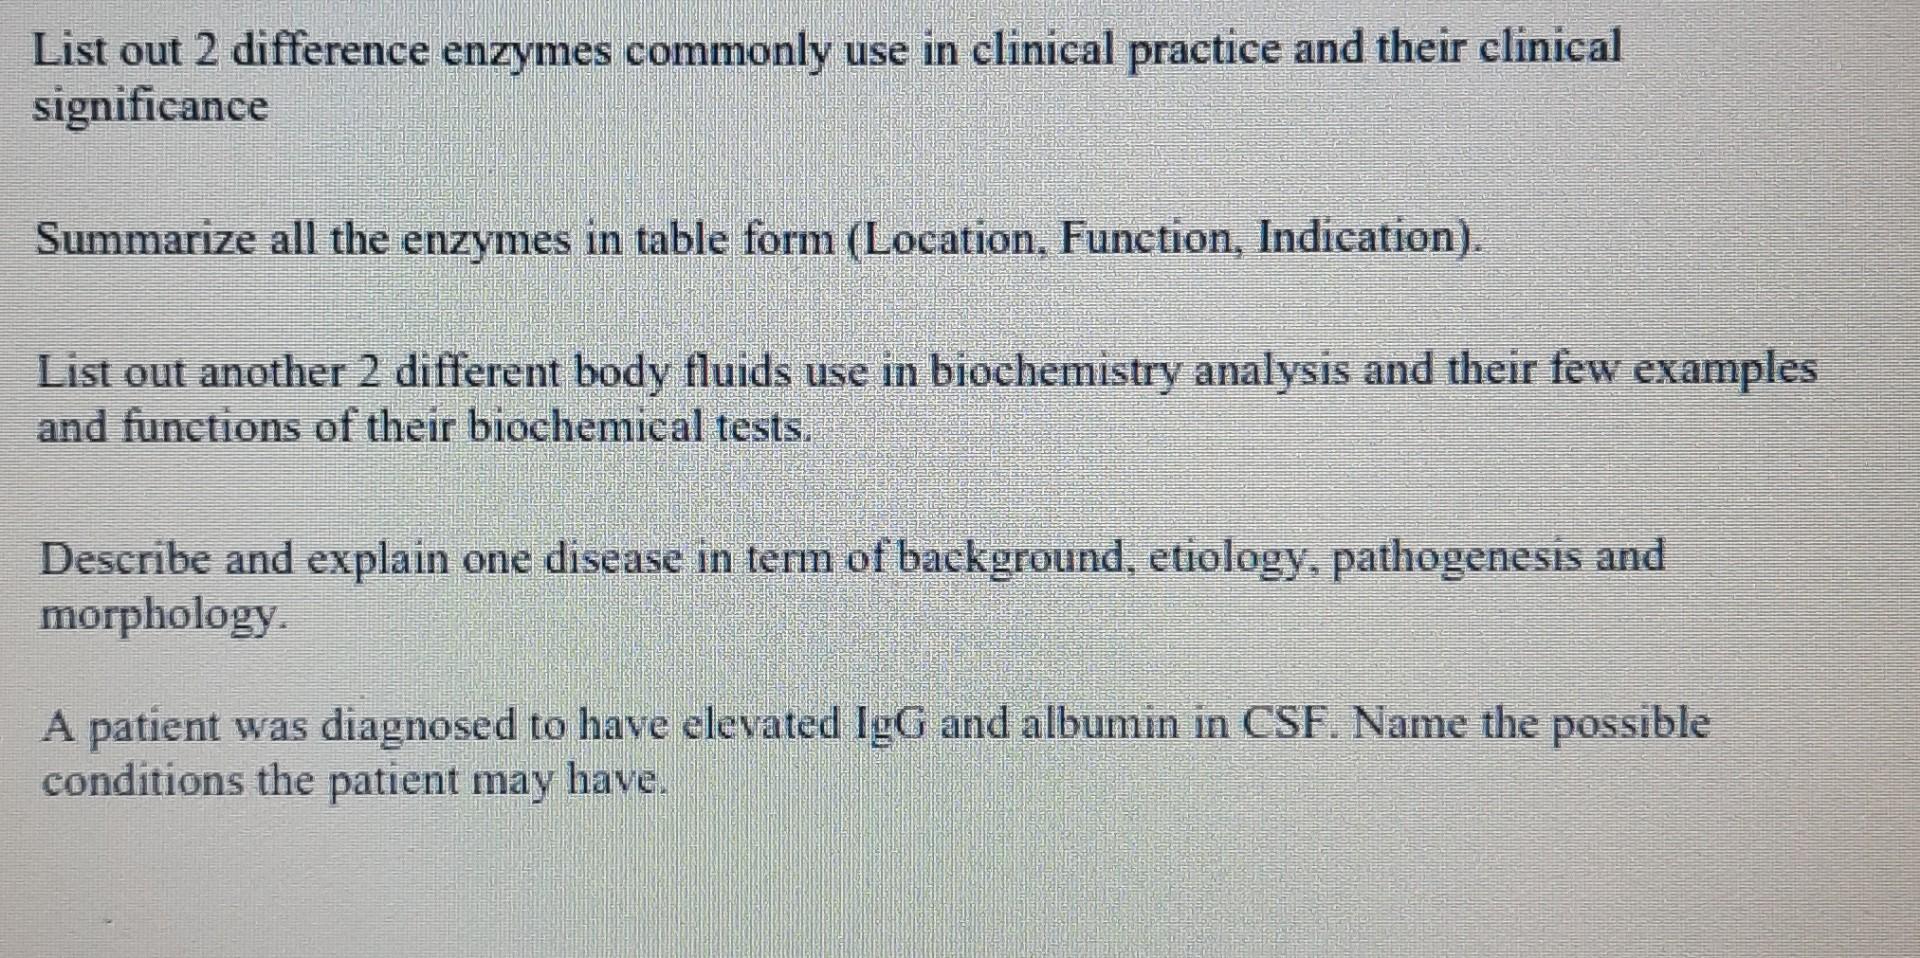 clinical importance of enzymes